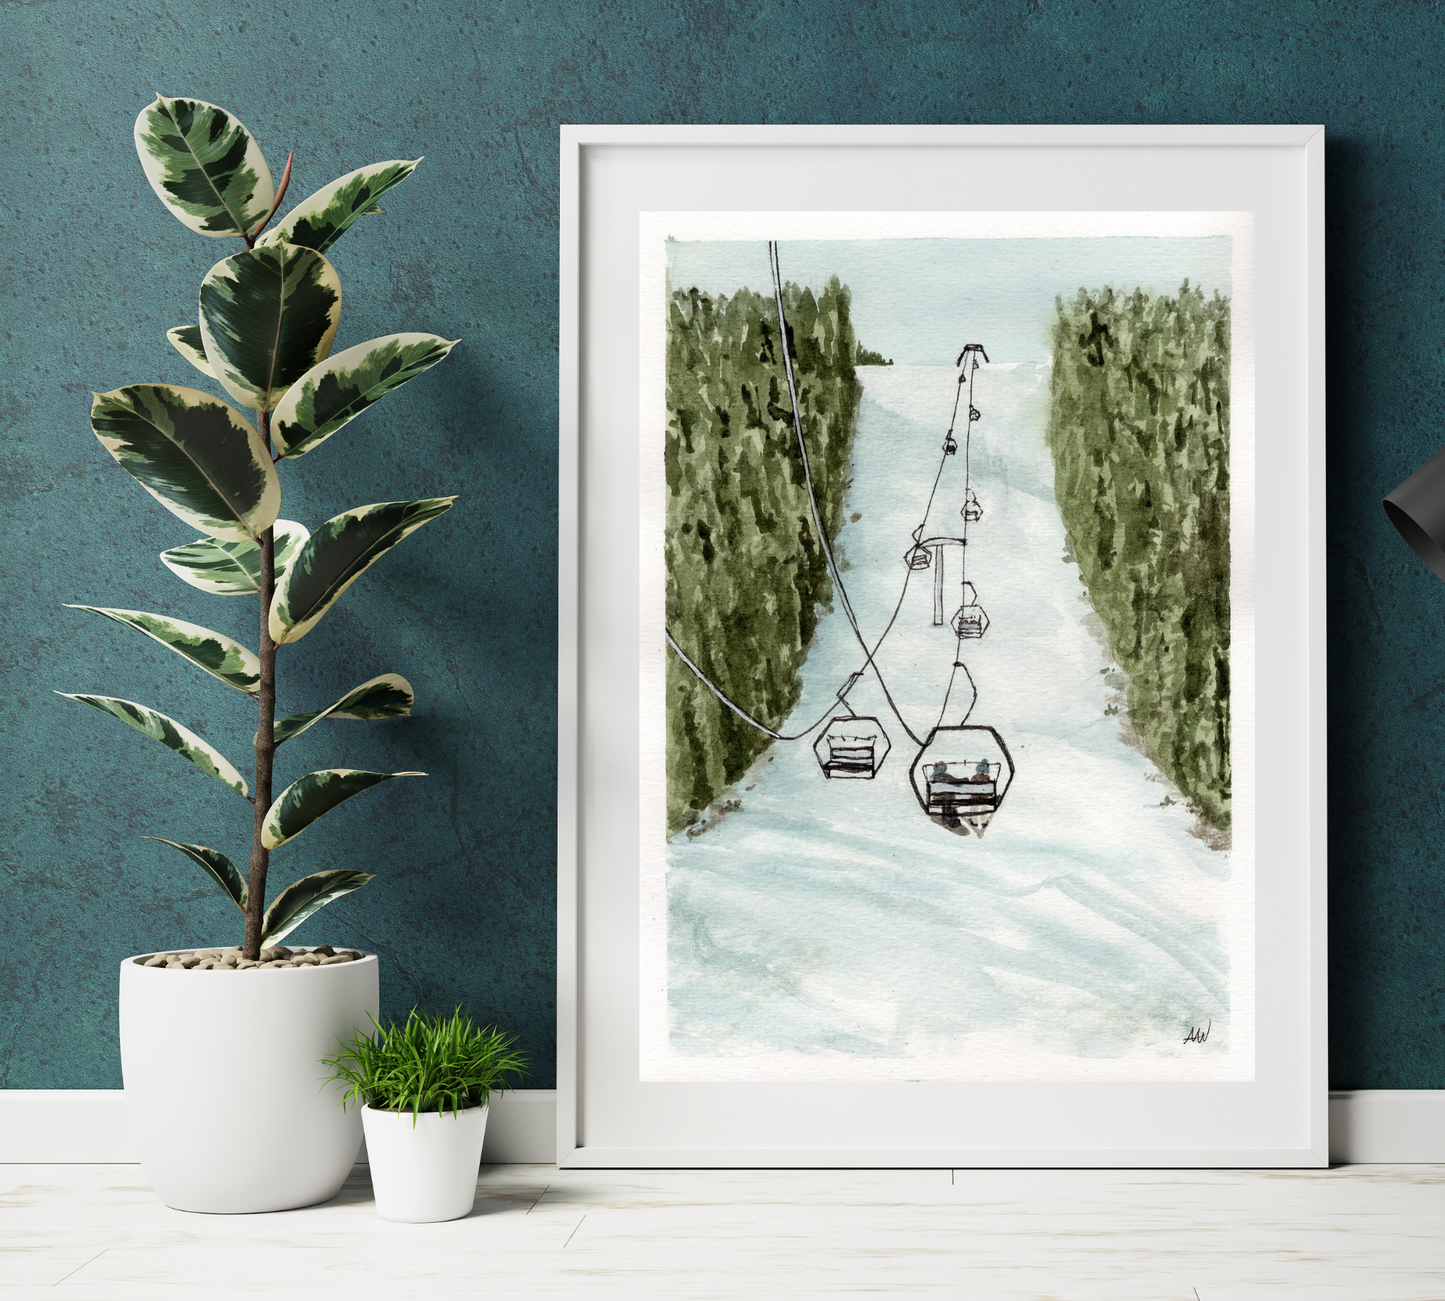 Skiing through the Pines - Pen and Watercolor Painting - Archival Quality Art Print